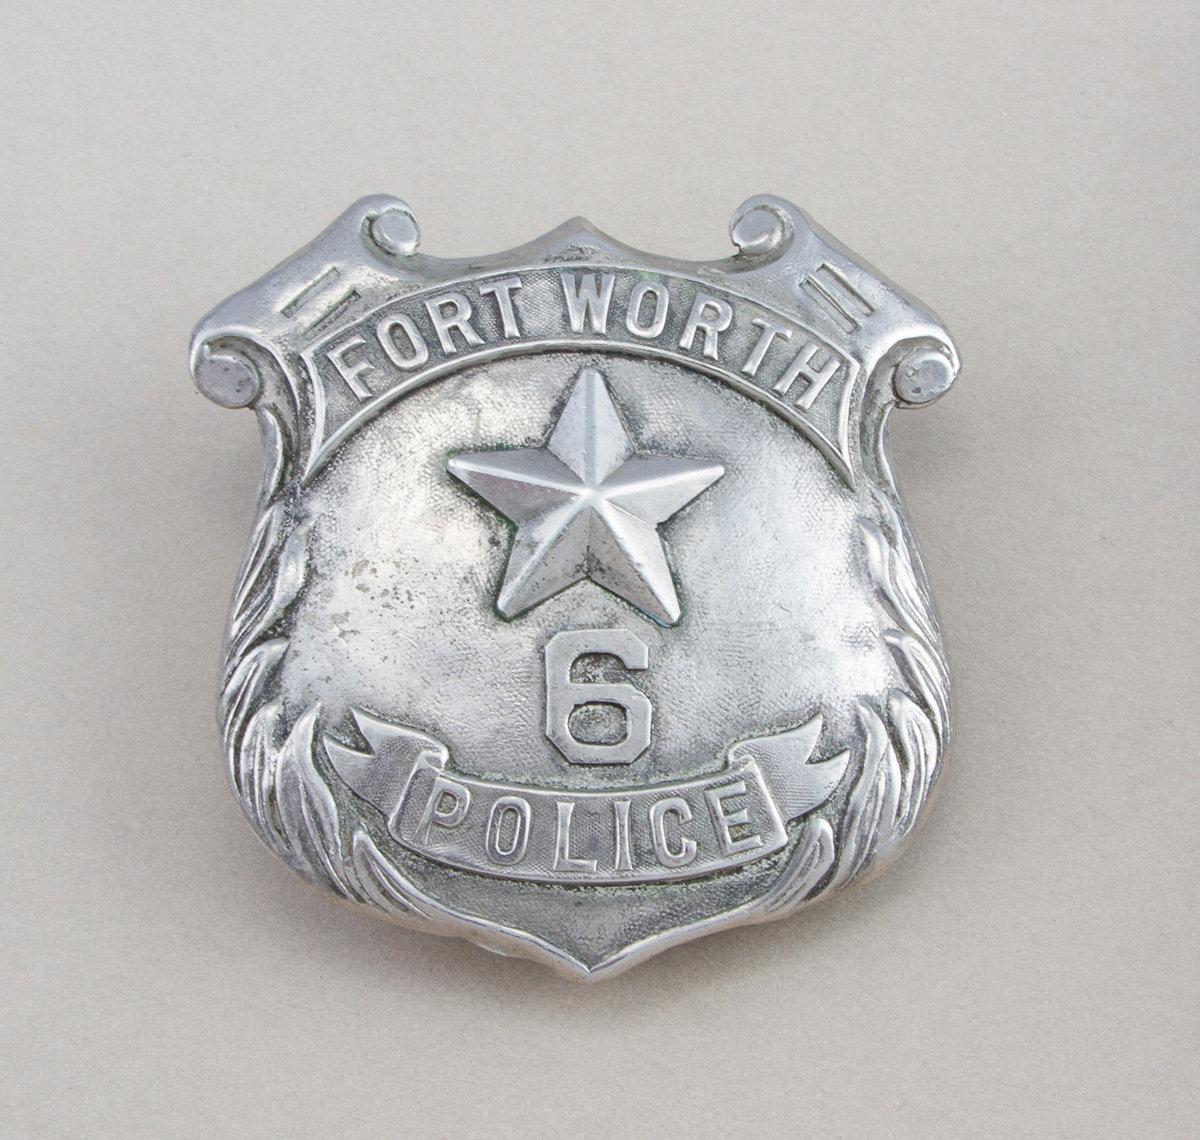 Very desirable shield shaped Badge for Fort Worth Police.  Badge No. 6, 2 5/8".  Turn of the century